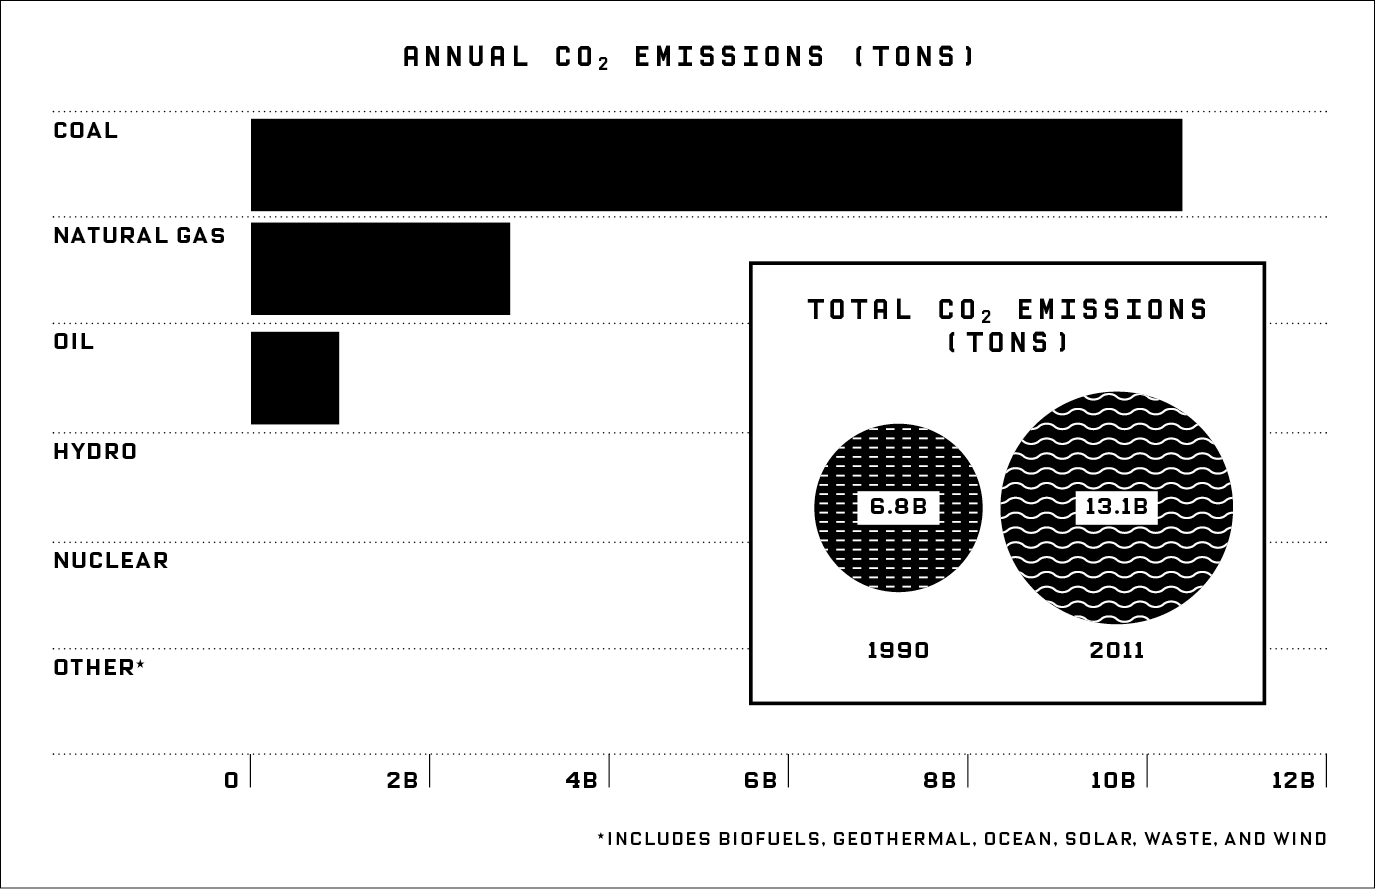 Annual CO2 Emissions by the Ton